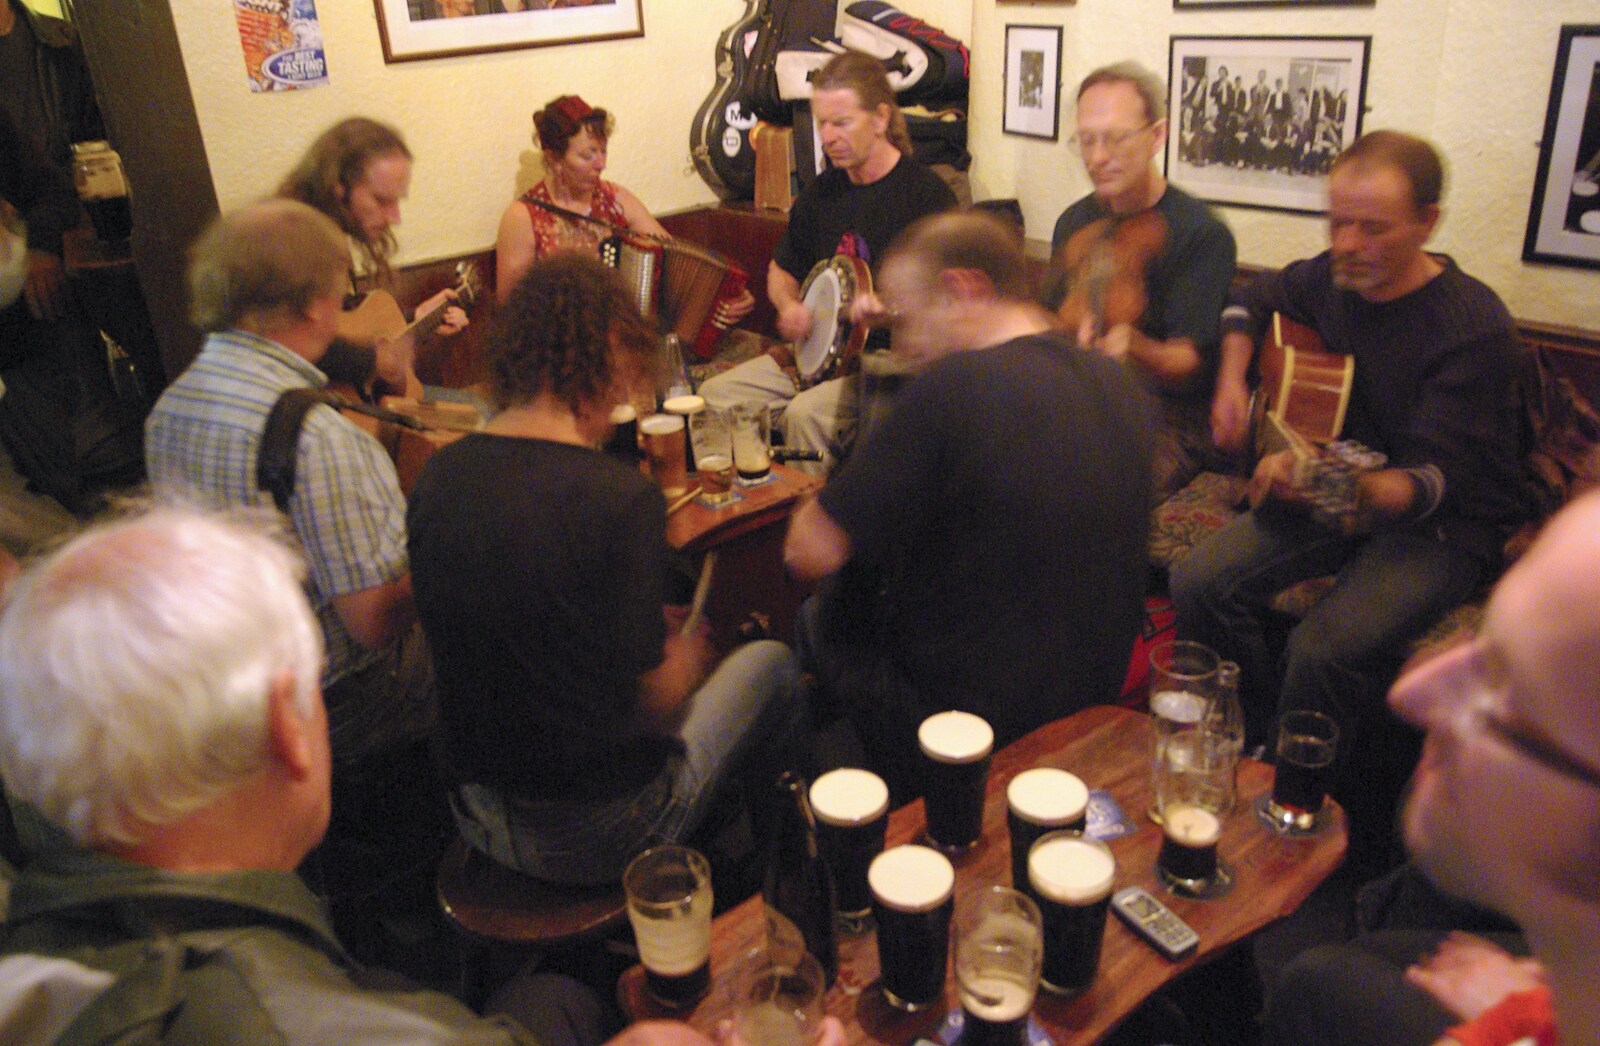 Kilkee to Galway, Connacht, Ireland - 23rd September 2007: Pints of Guinness